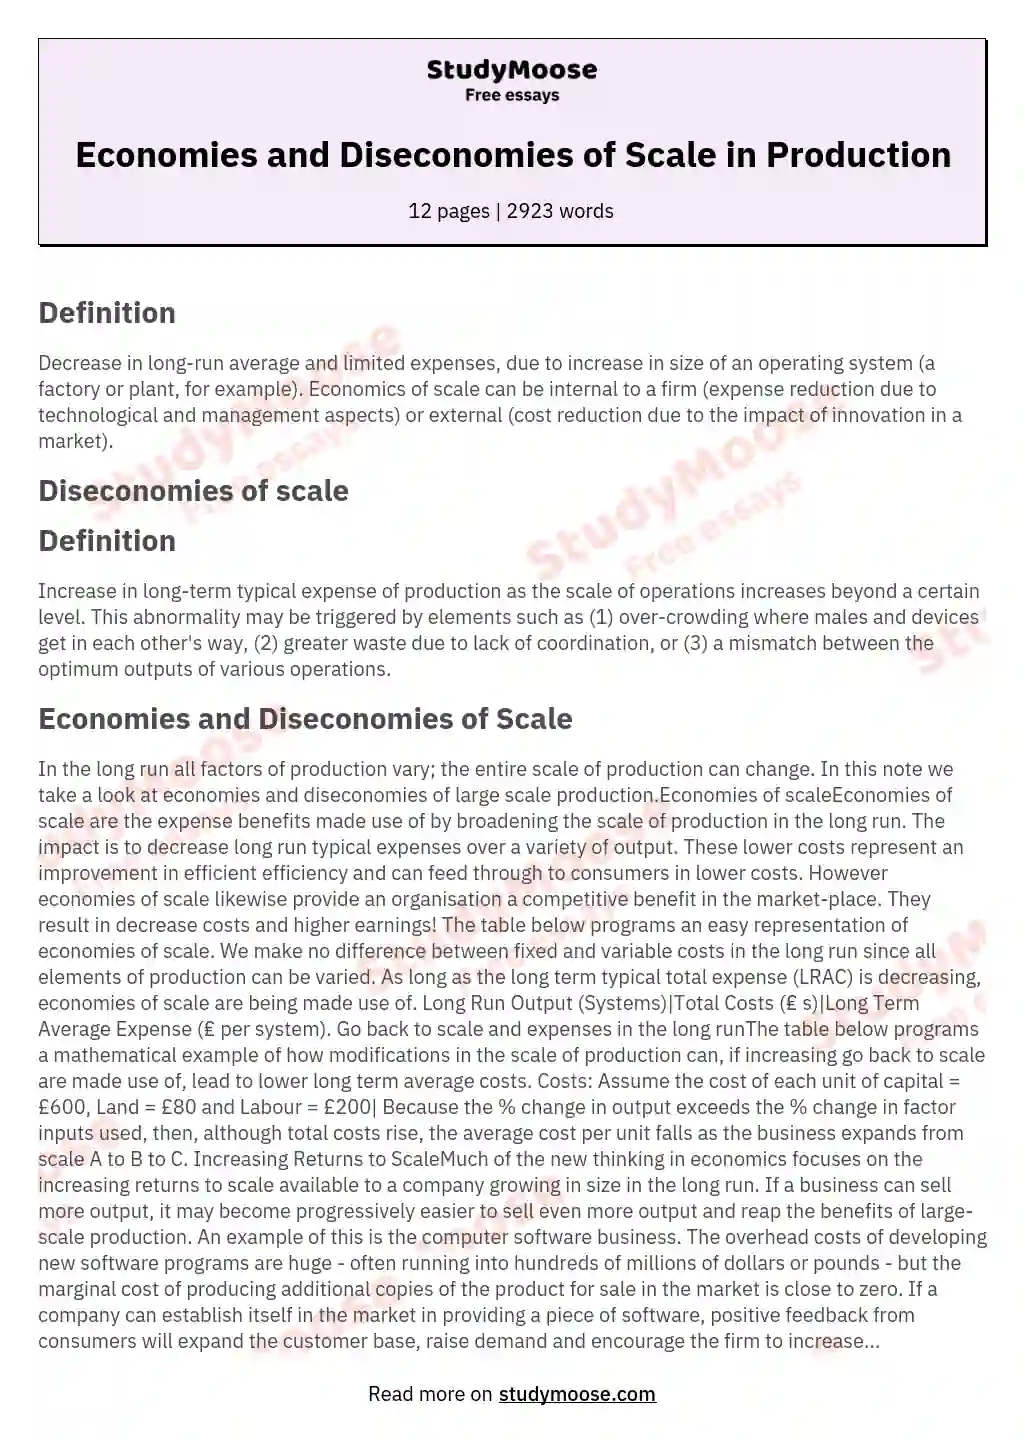 Economies and Diseconomies of Scale in Production essay